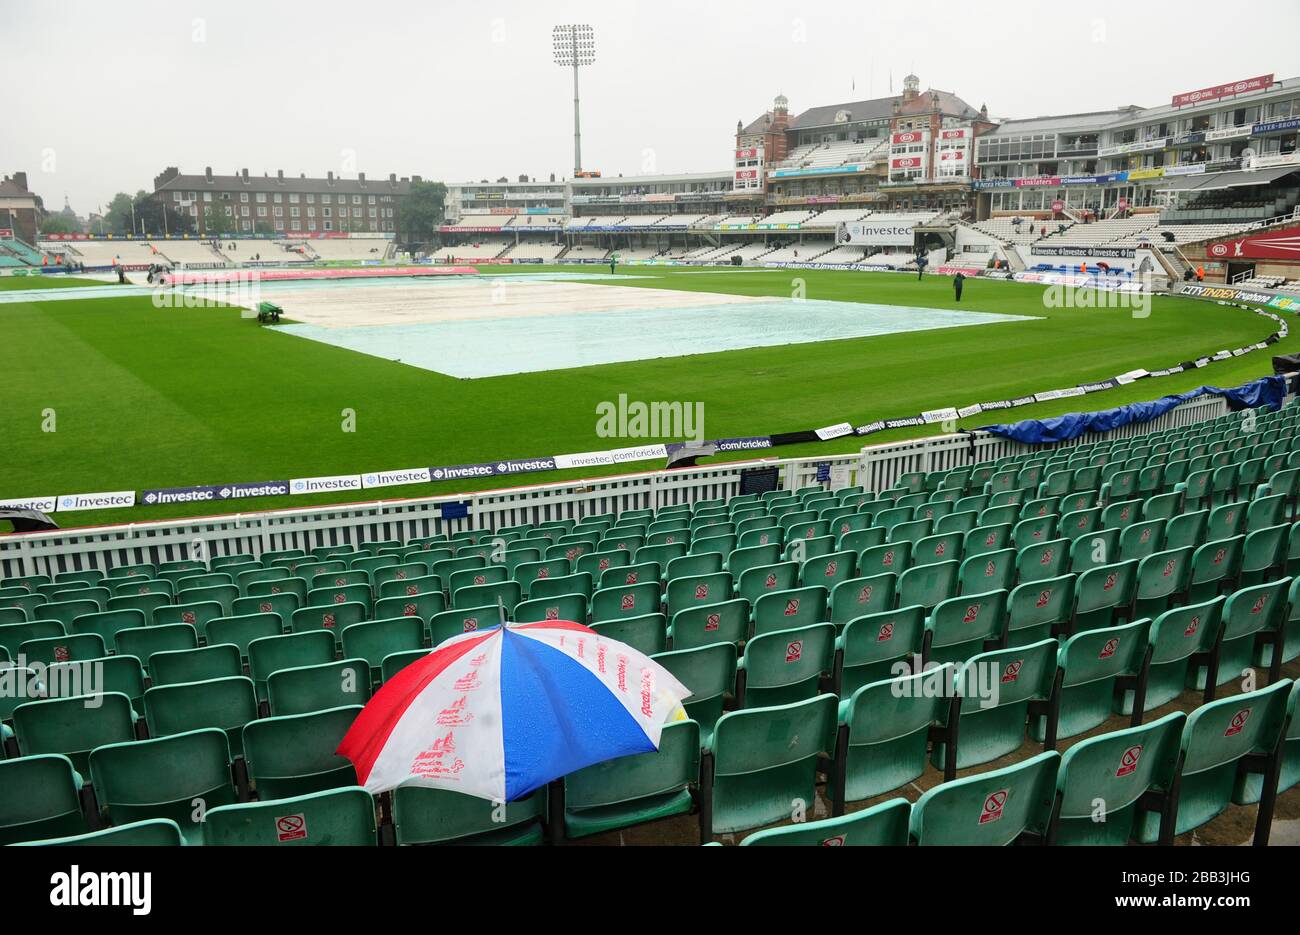 Bad weather delays the start of play on day four of the Fifth Investec Ashes Test match at The Kia Oval, London. Stock Photo